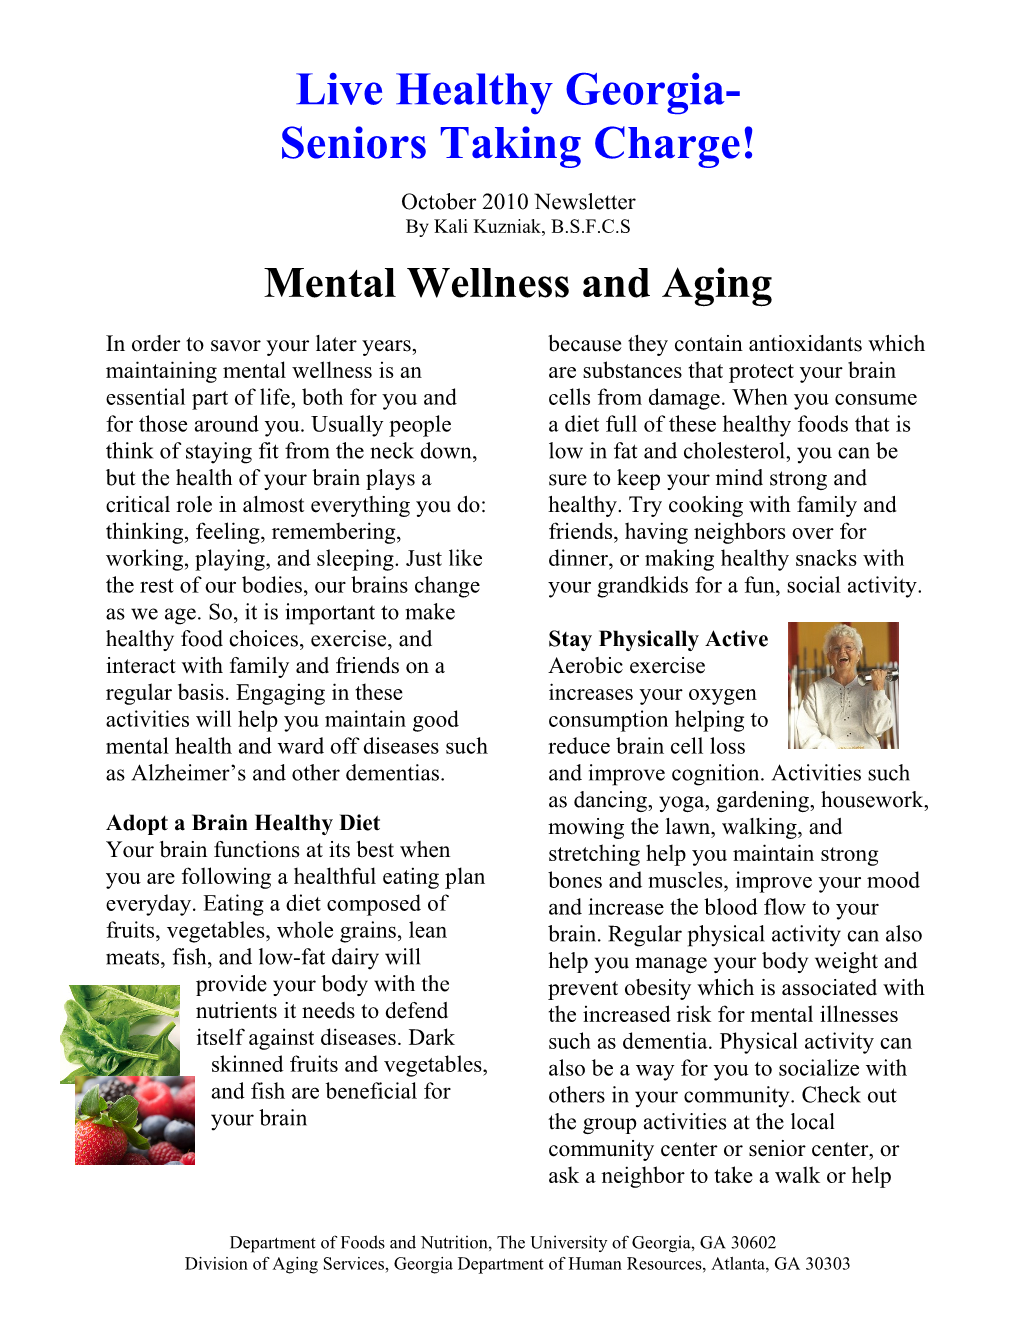 For People to Savor Their Later Years, Maintaining Mental Wellness Is an Essential Part